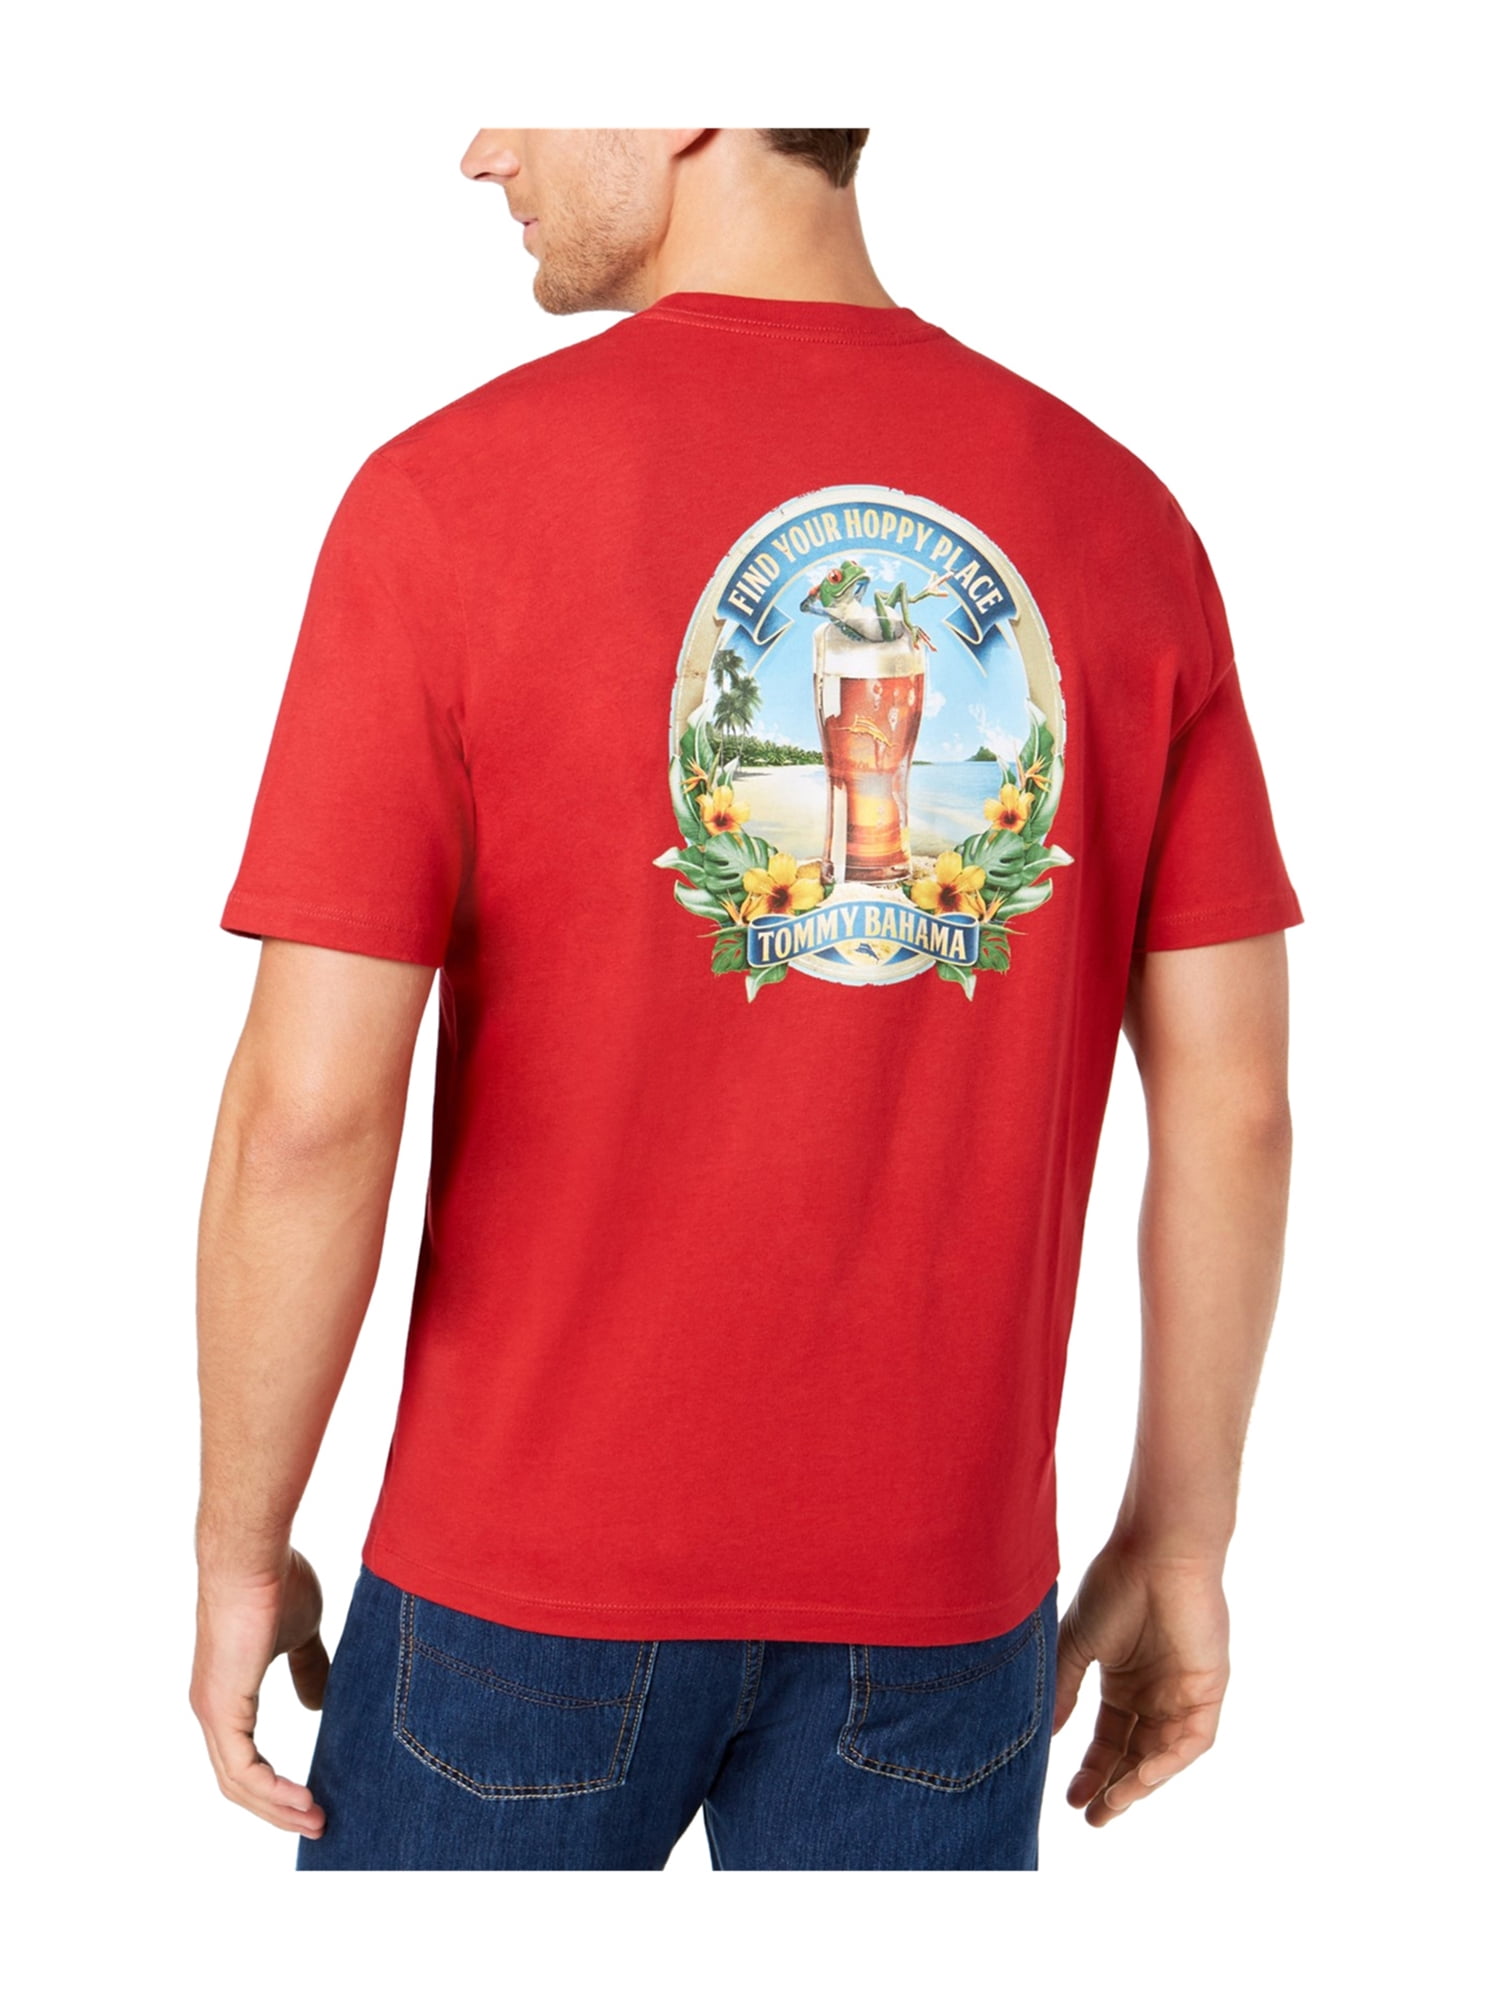 tommy bahama graphic t shirts